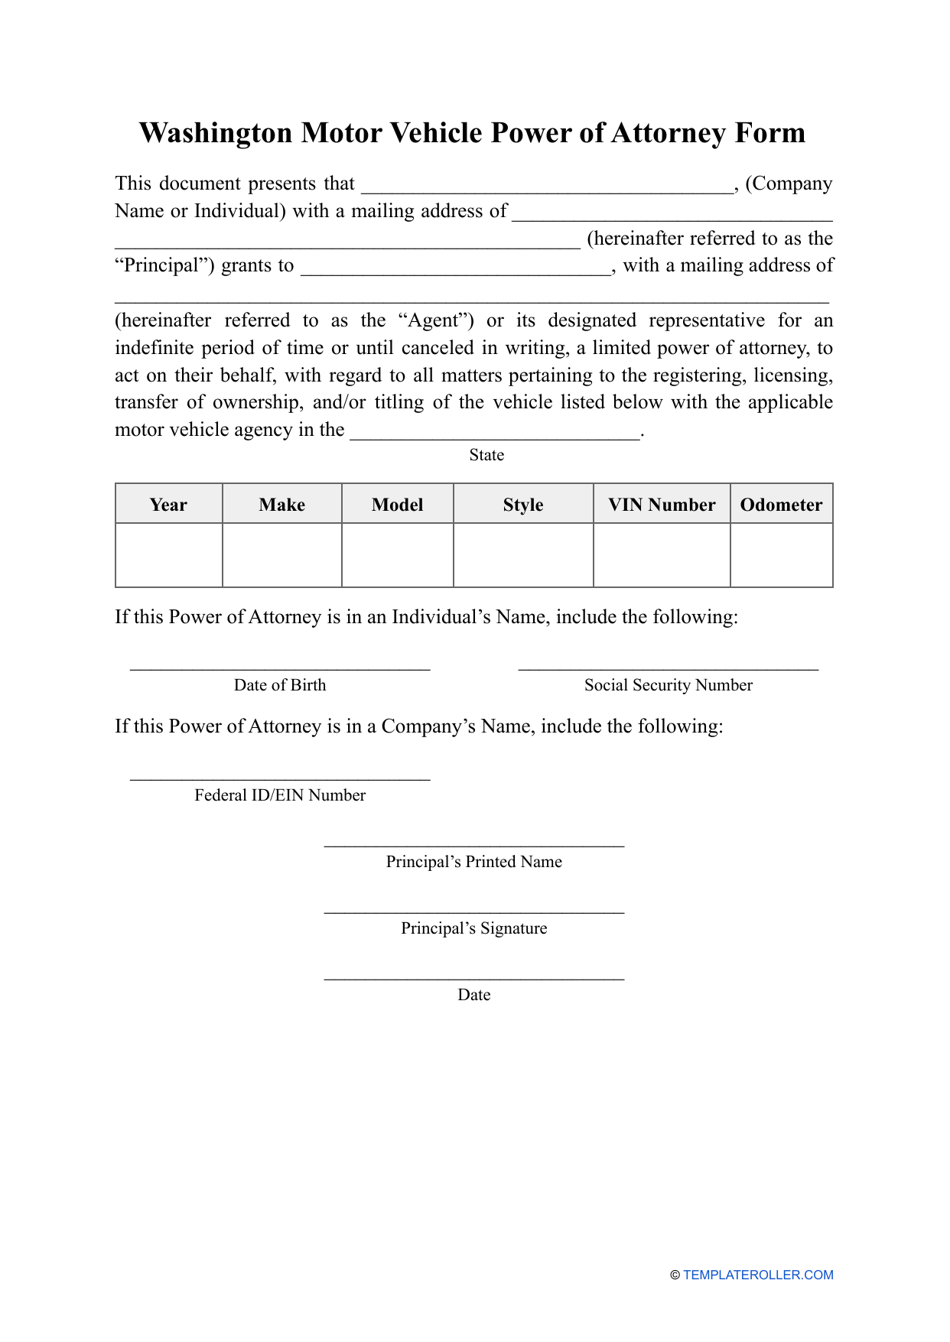 Motor Vehicle Power of Attorney Form - Washington, Page 1